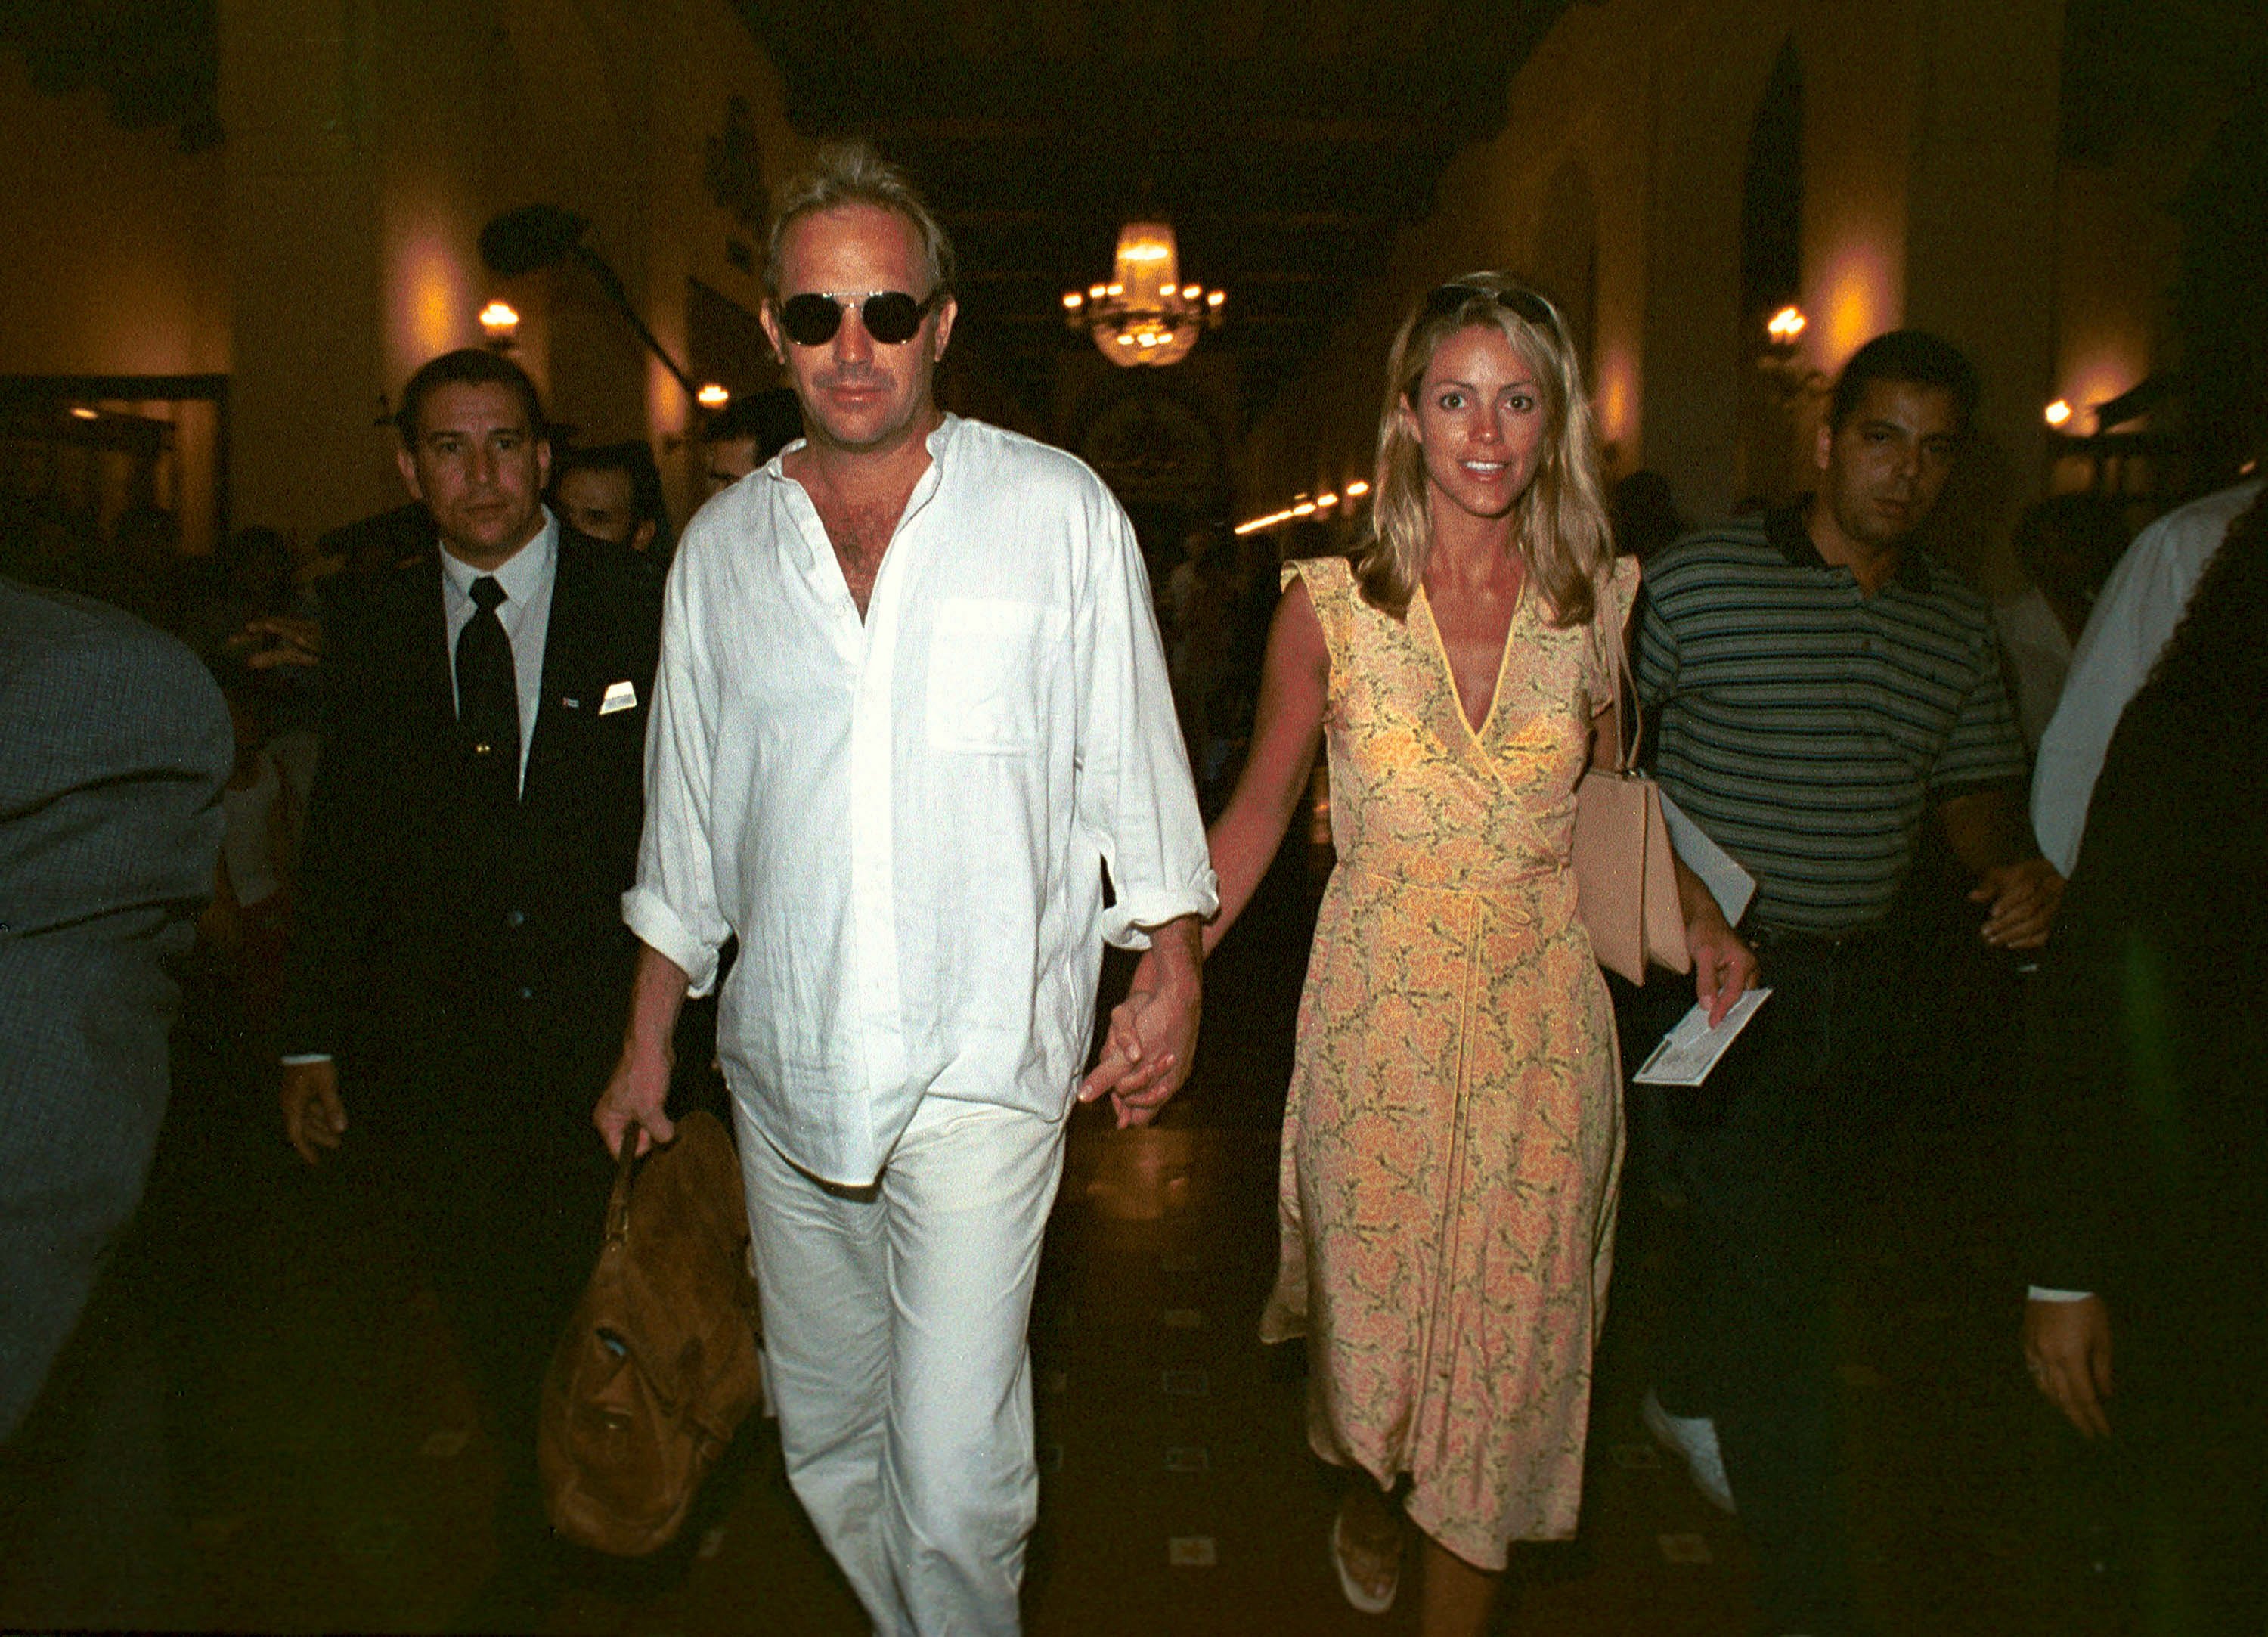 Kevin Costner and his girlfriend Christine Baumgartner at the Hotel Nacional April 9, 2001 in Havana, Cuba.  |  Source: Getty Images